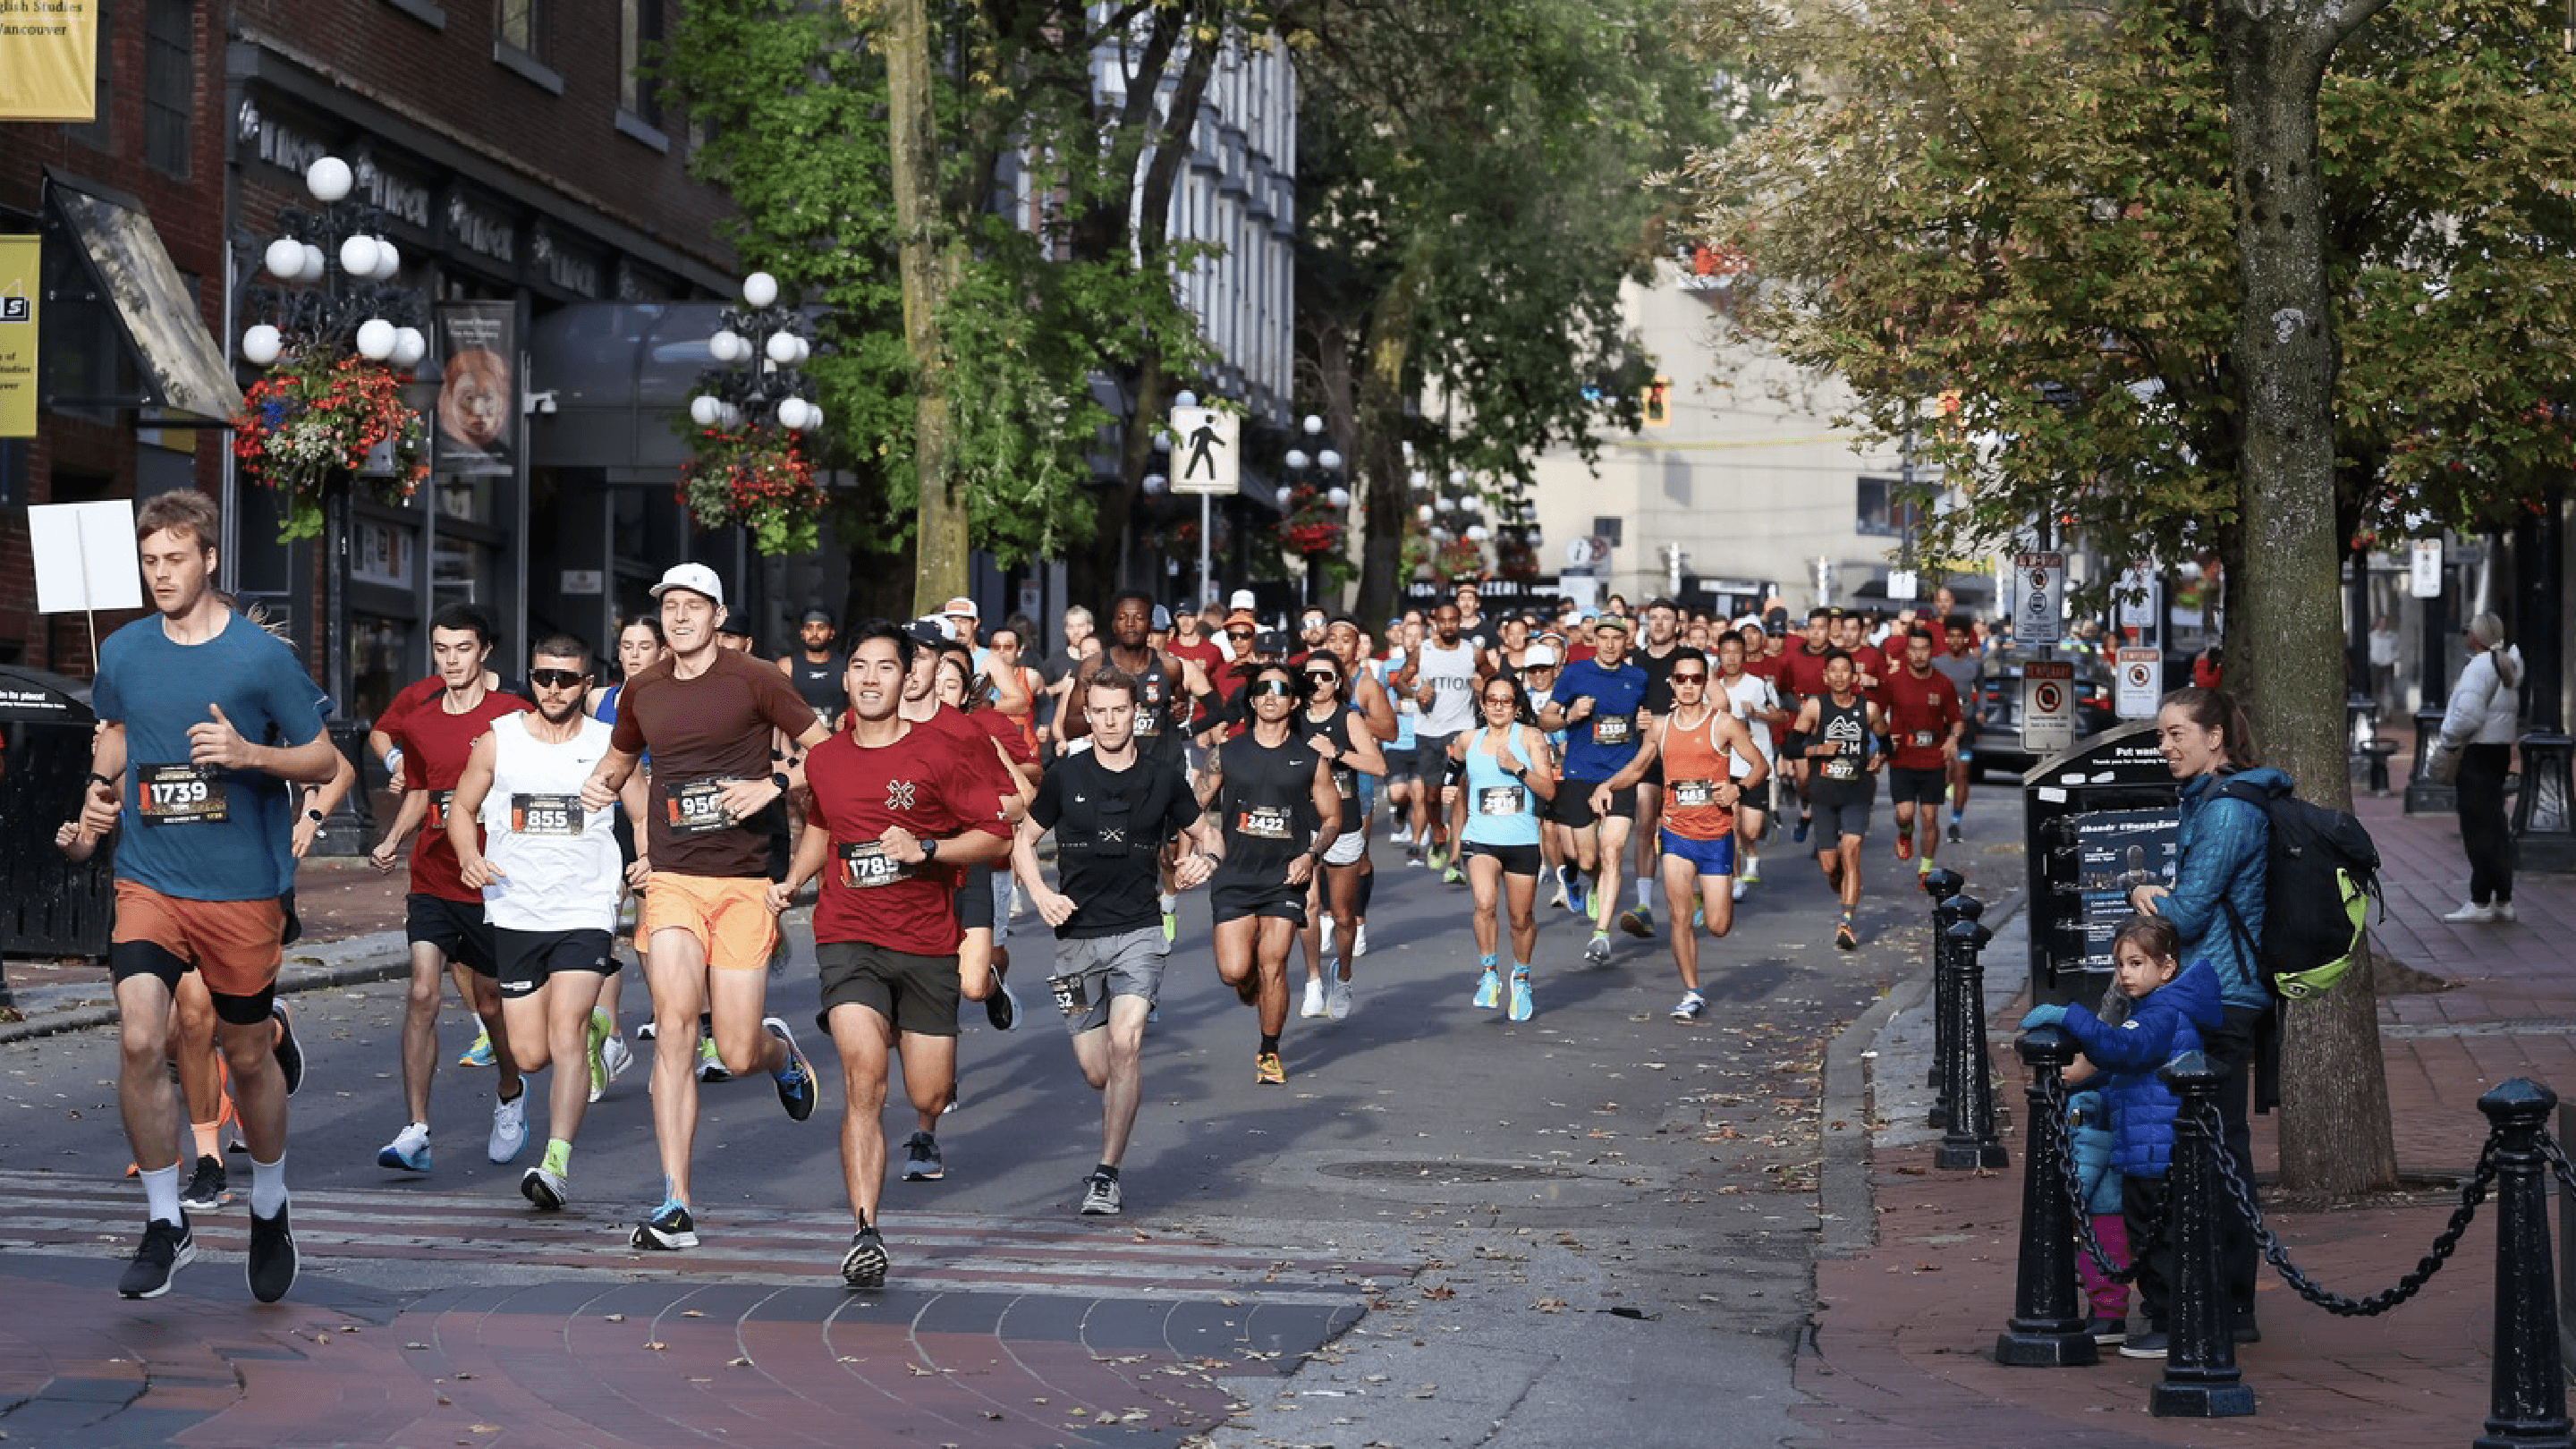 Competitors running through Gastown in Vancouver